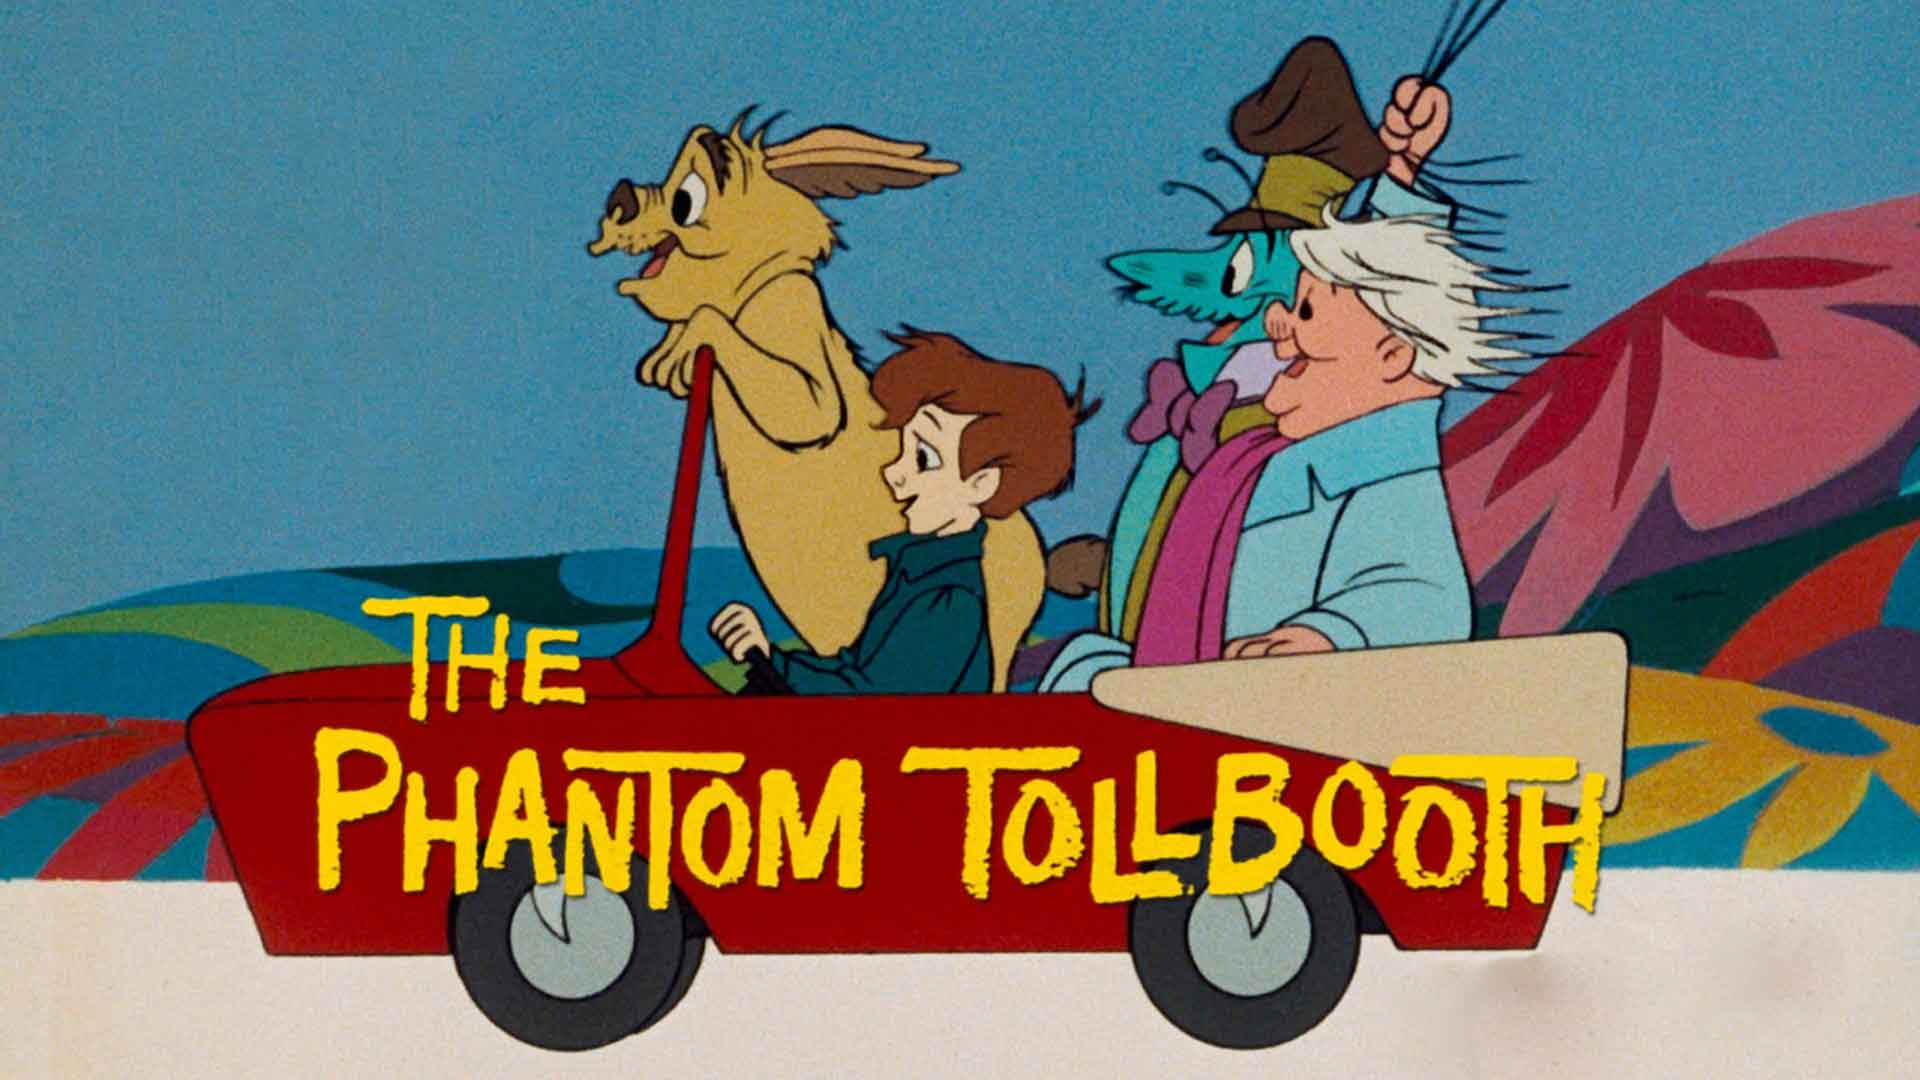 REEL CONSERVATIVE: The Phantom Tollbooth